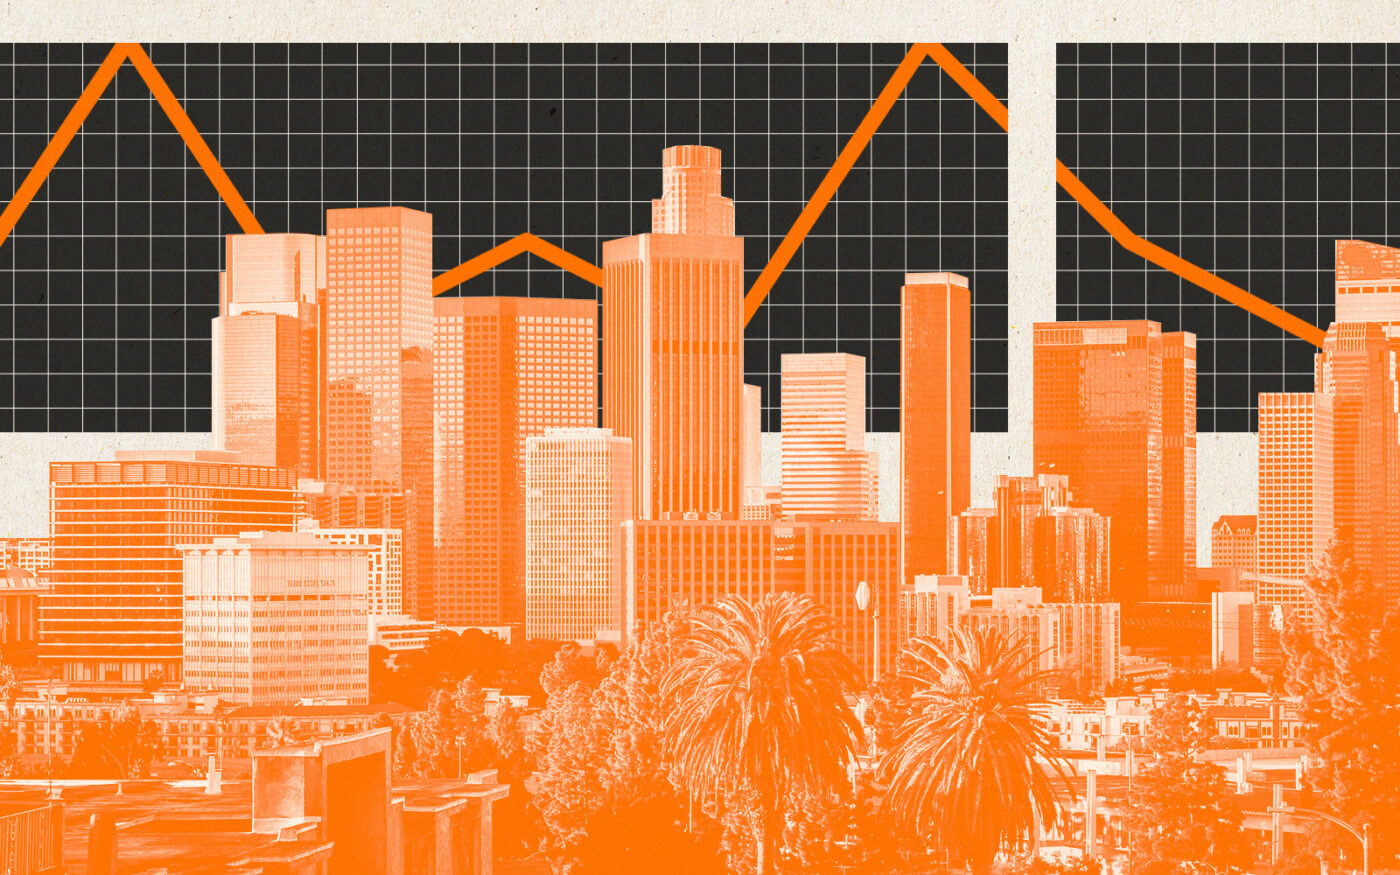 Los Angeles apartment market in doldrums